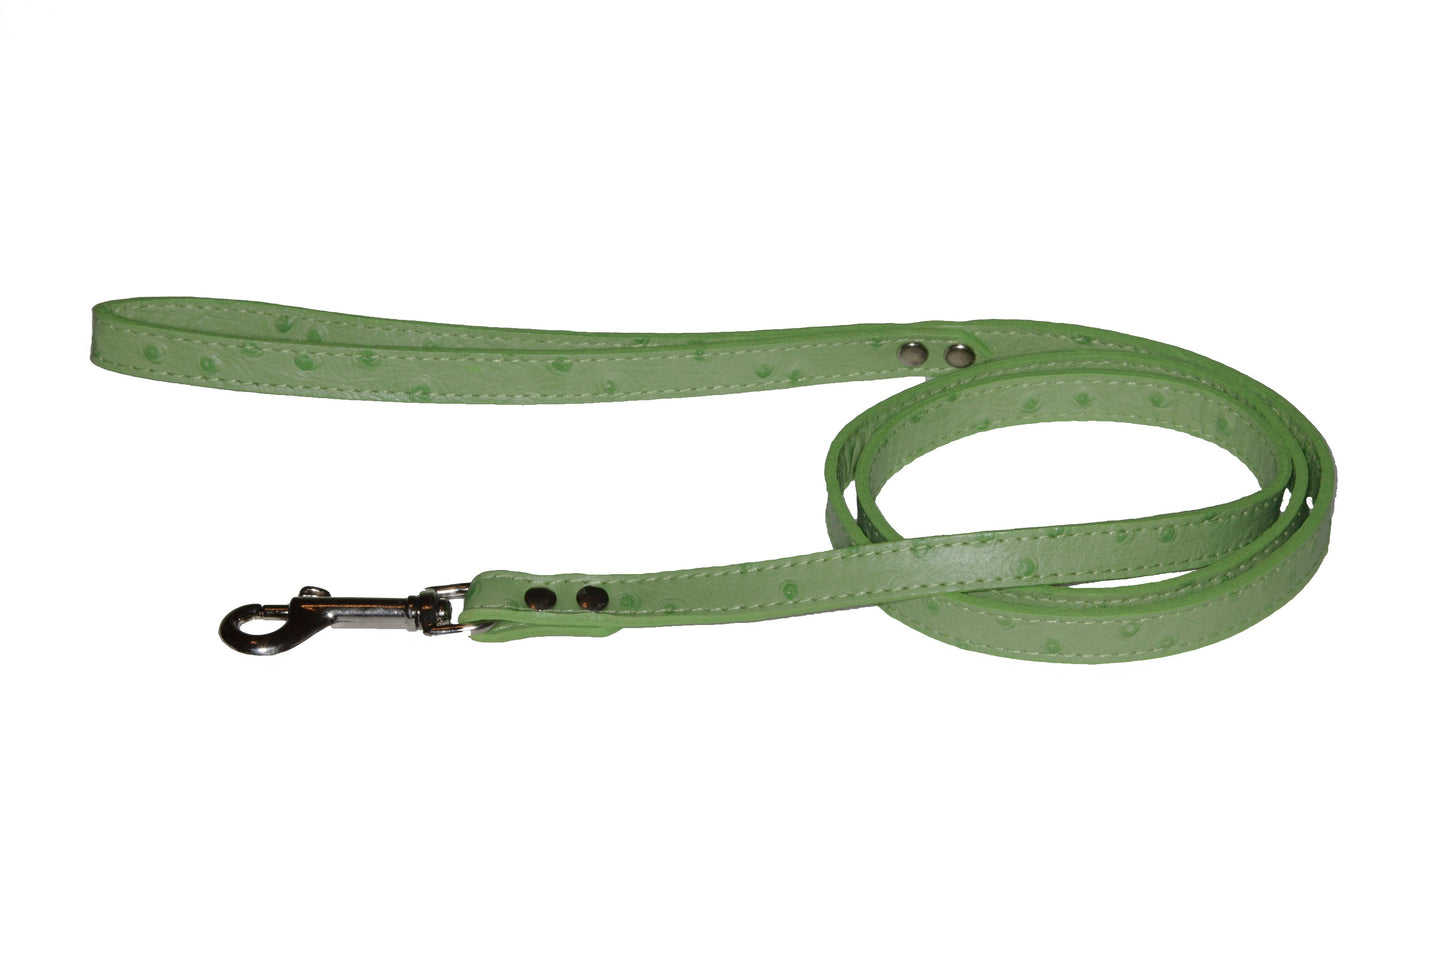 Specialty Leather Leads to Match ORIGINAL ChokeFree™ Specialty Leather Harnesses